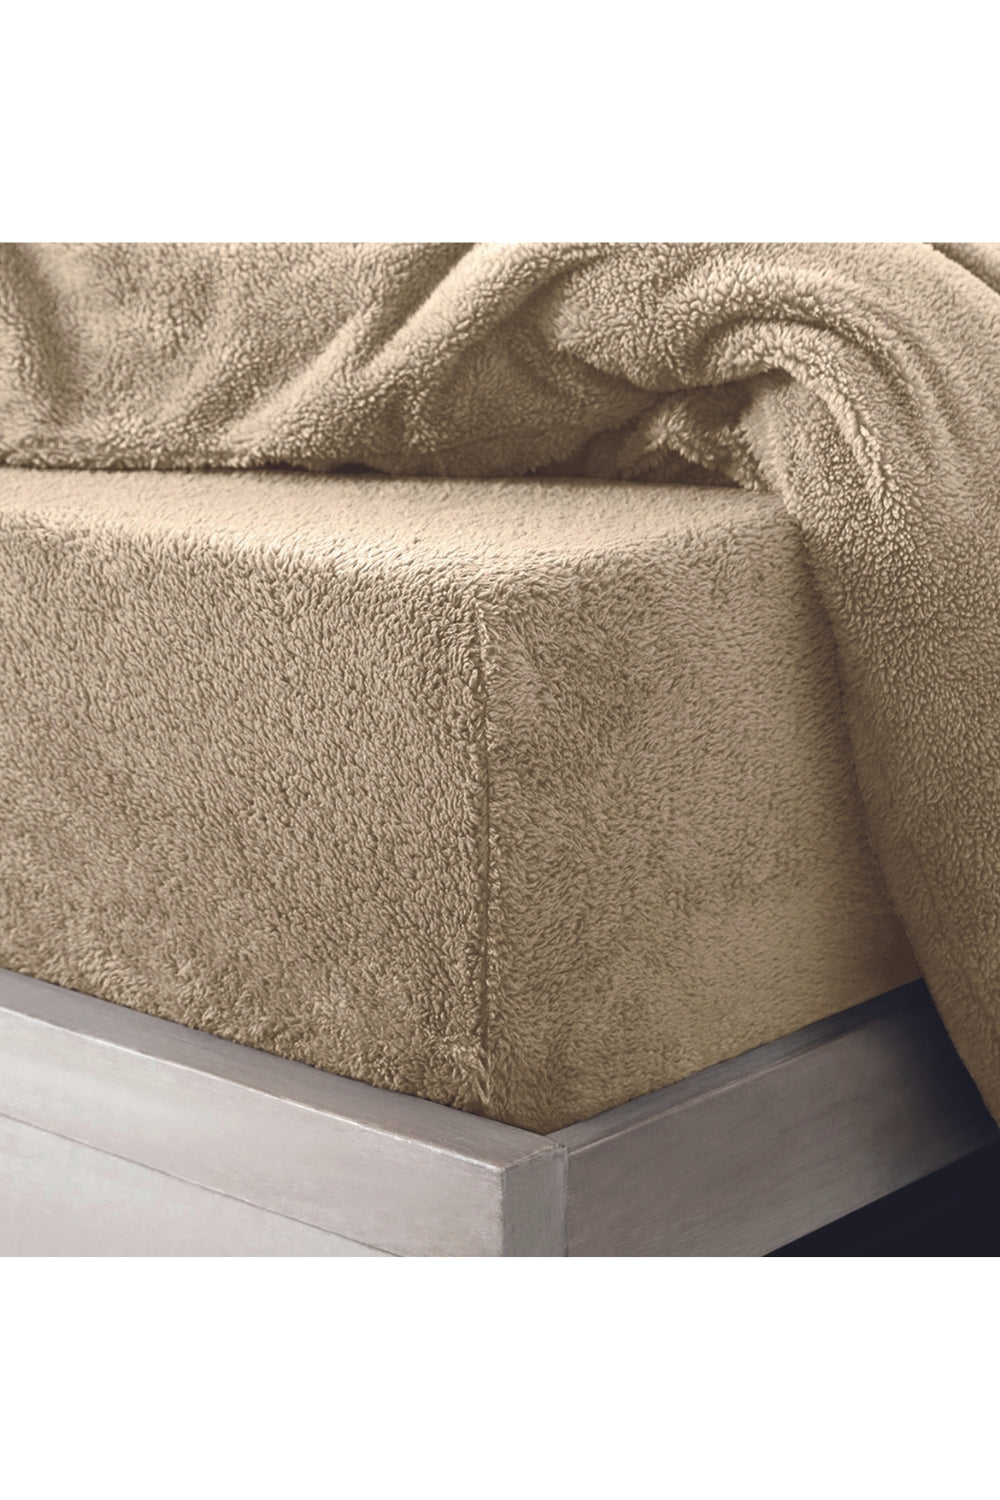 The Home Collection Teddy Fitted Sheet - Taupe 1 Shaws Department Stores